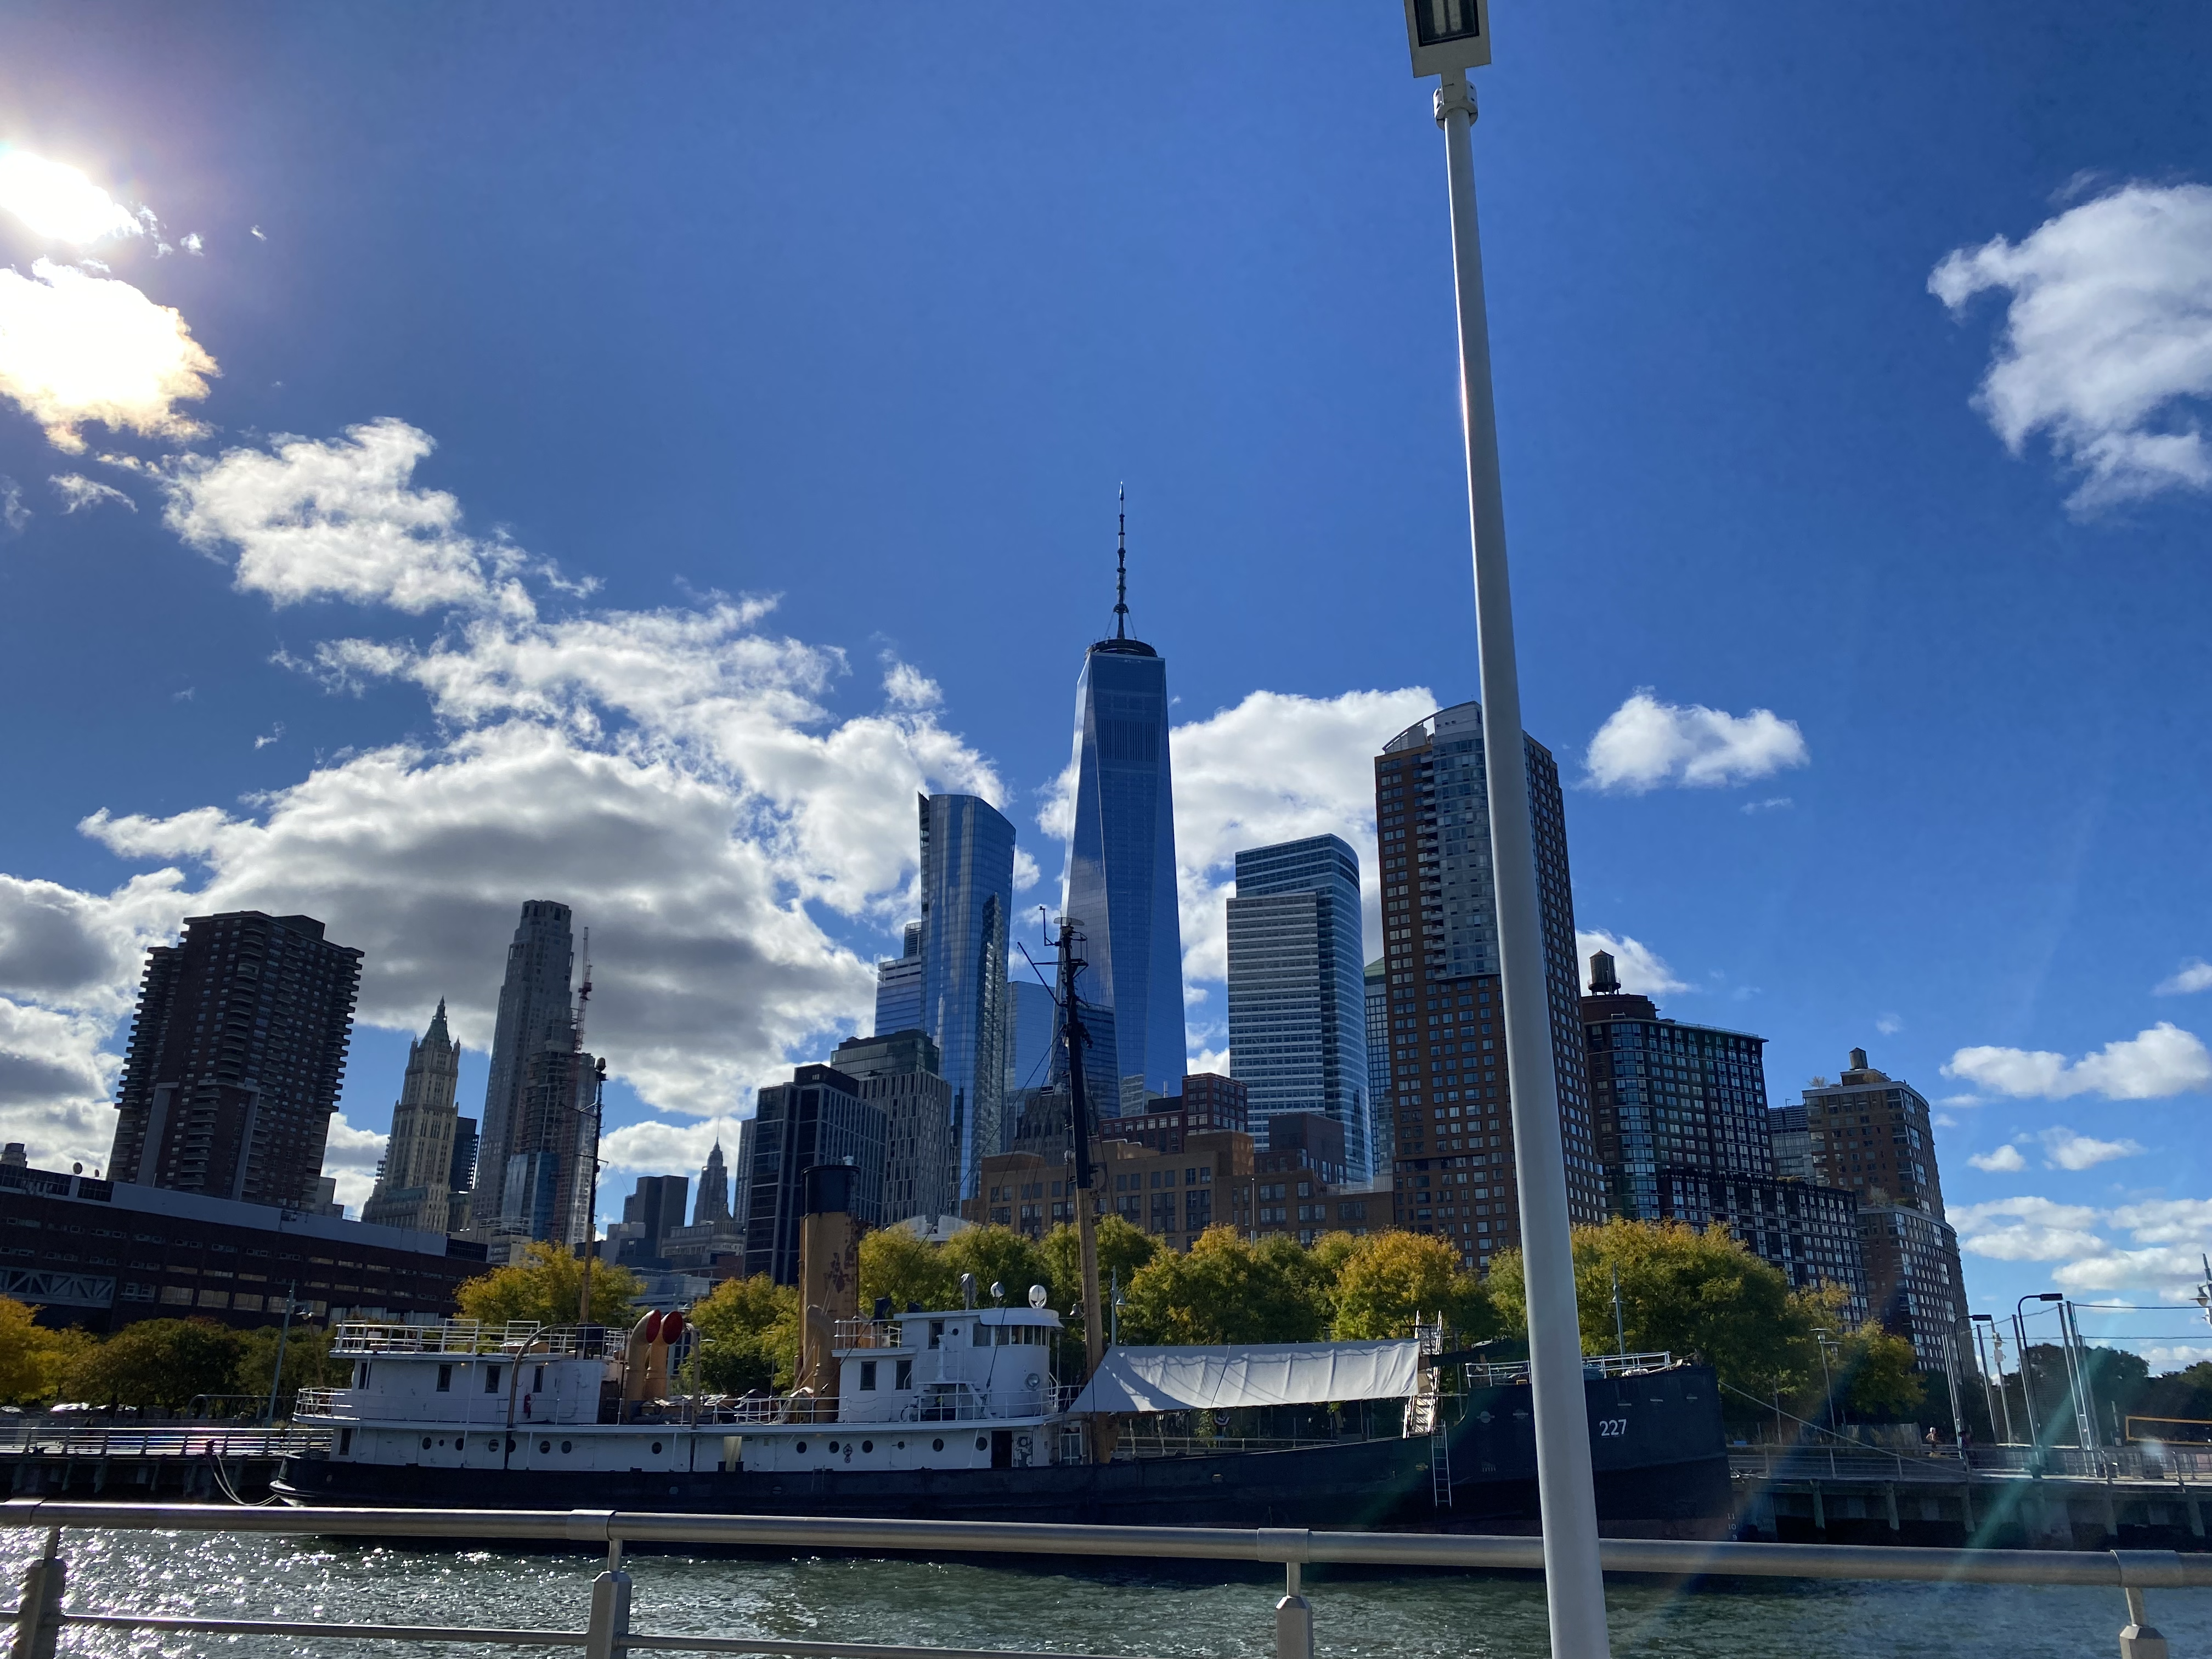 A view of downtown Manhattan from Pier 26 in the Hudson River Park.